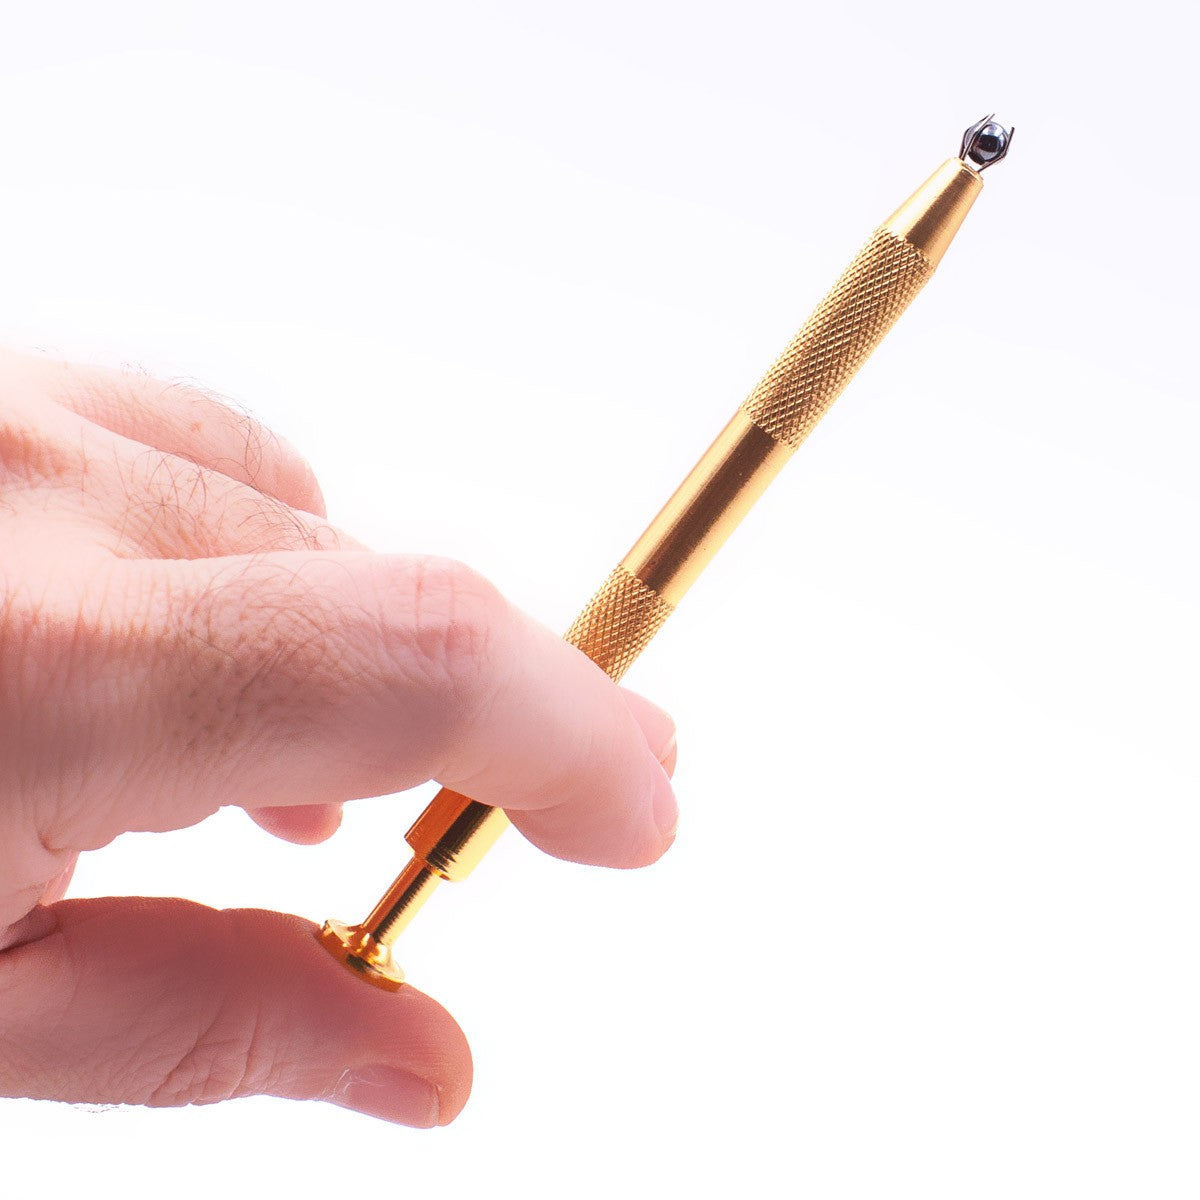 Hand holding The Stash Shack Pearl Grabber Tool for concentrates, gold finish, close-up view